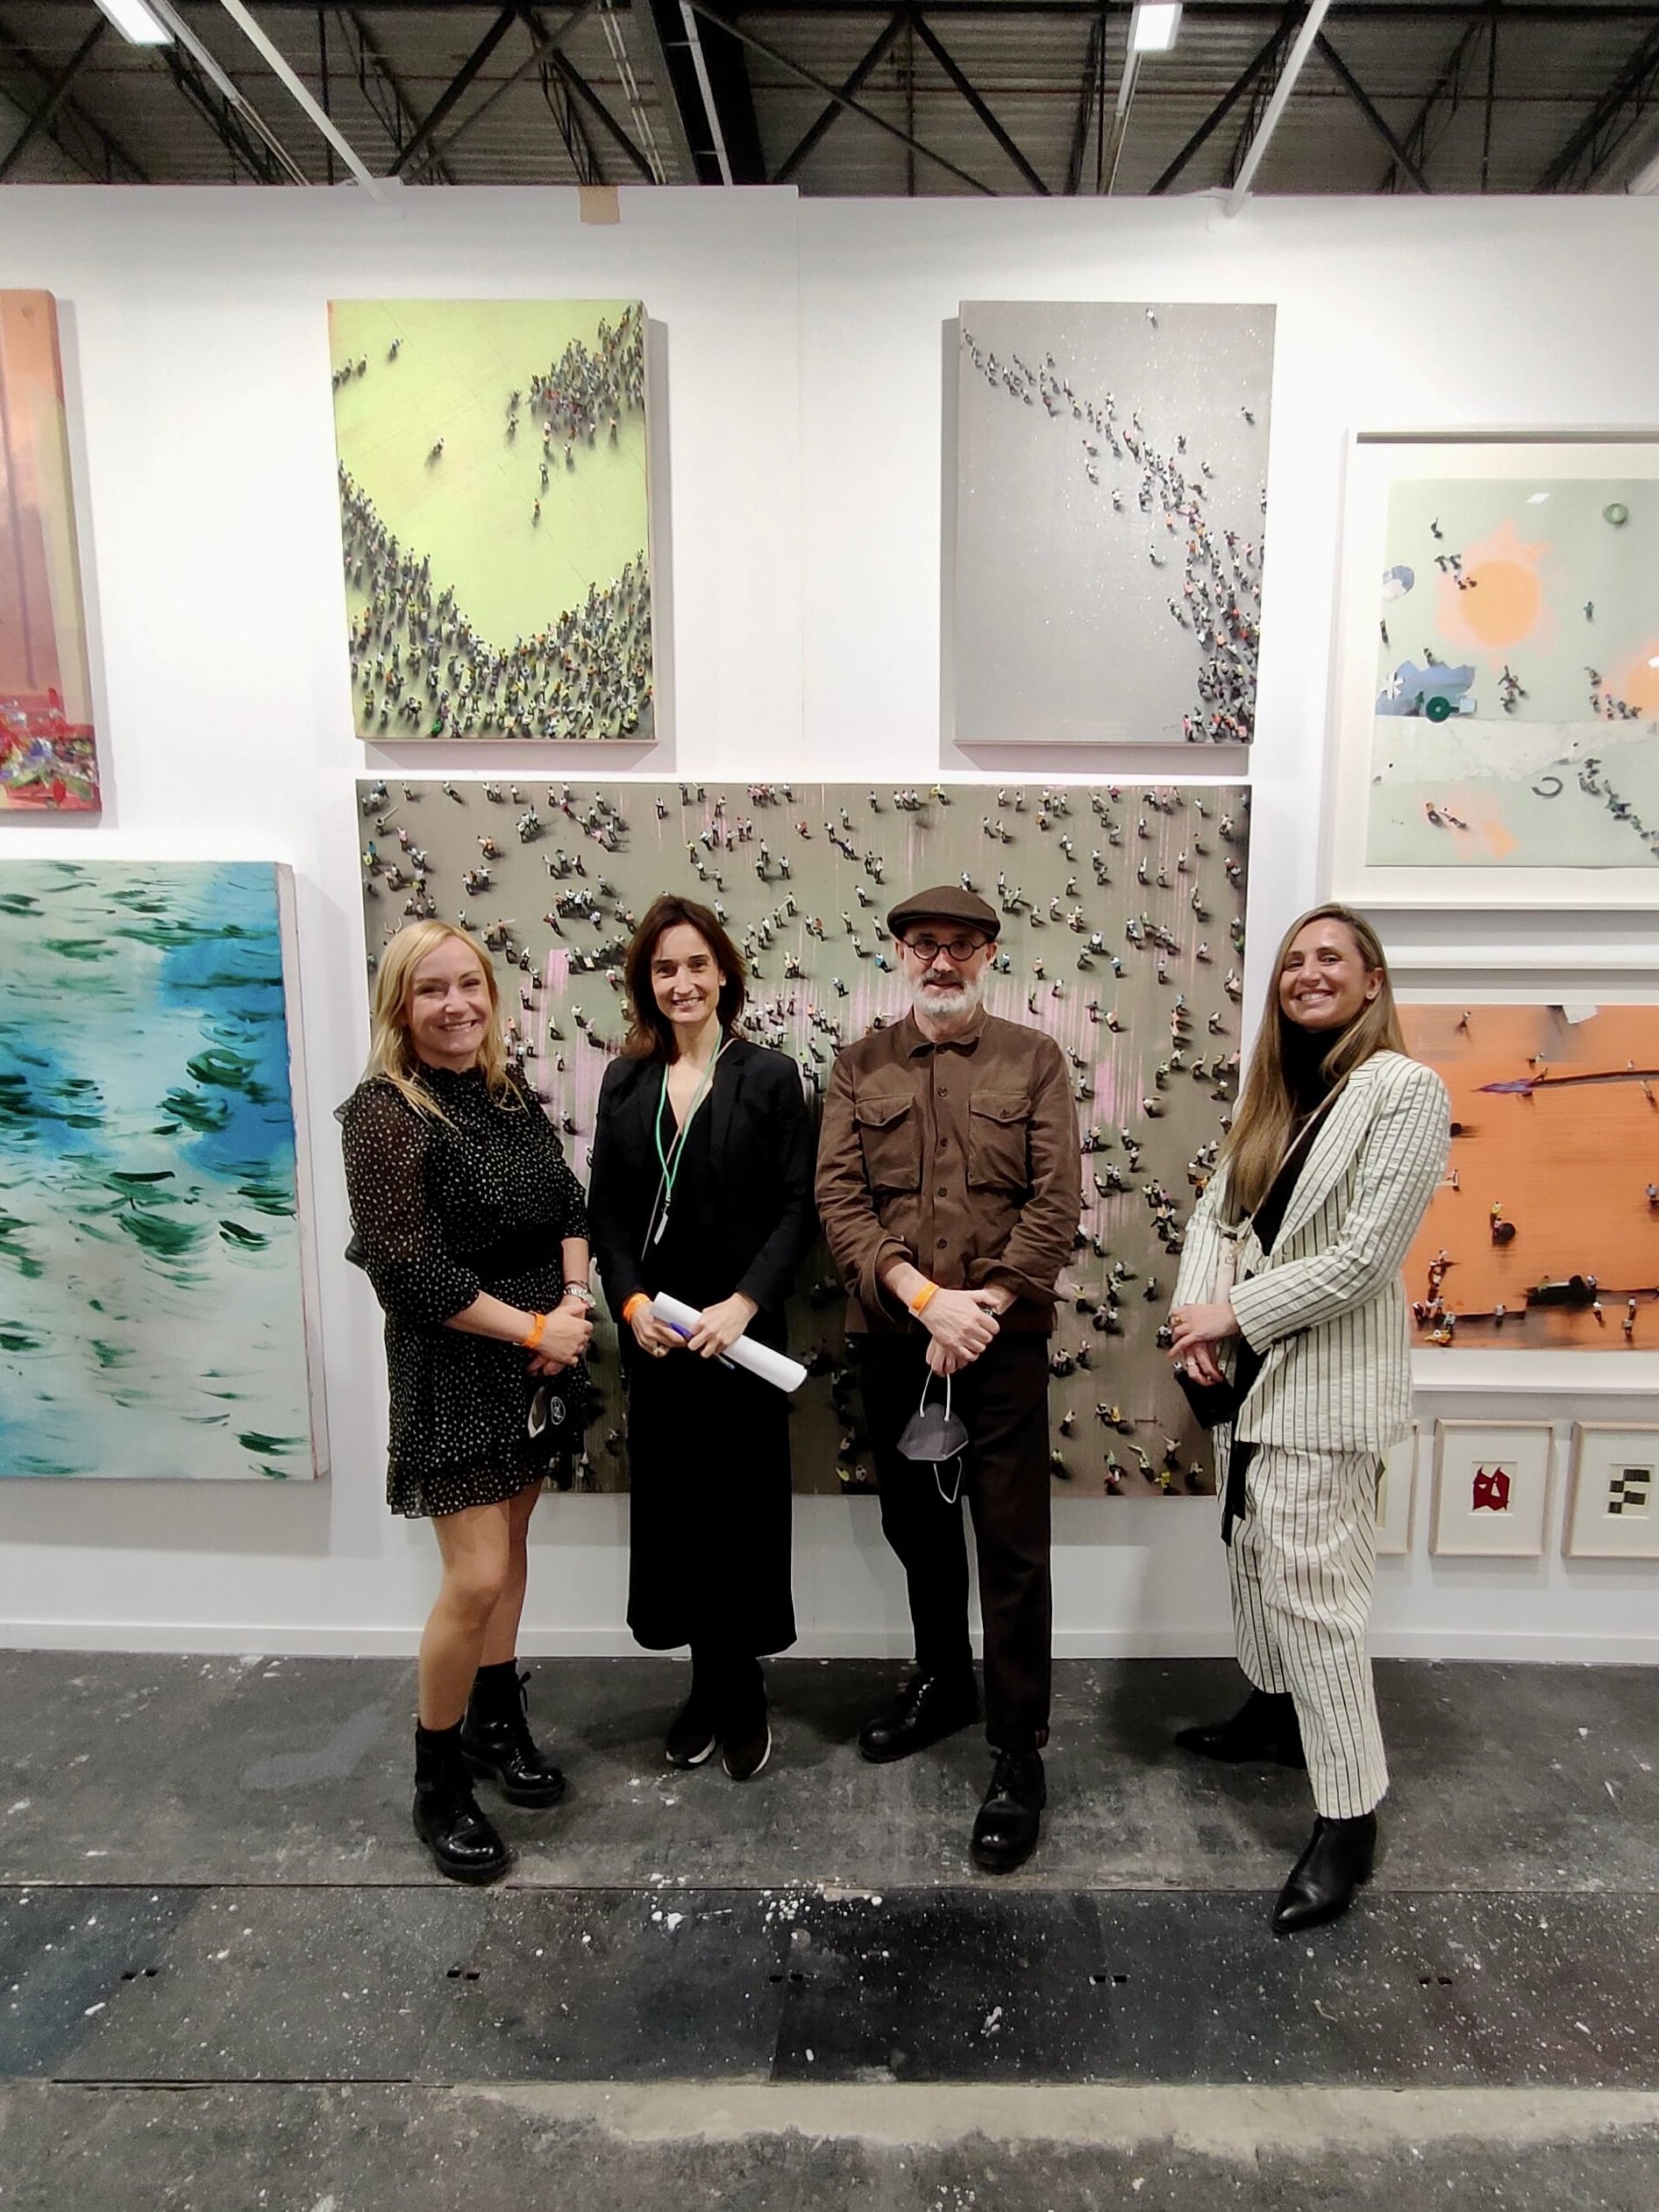 Pictured with the team at Marlborough Gallery, with Pablo Genovés, artist and son of Juan Genovés (whose work can be seen in the background)